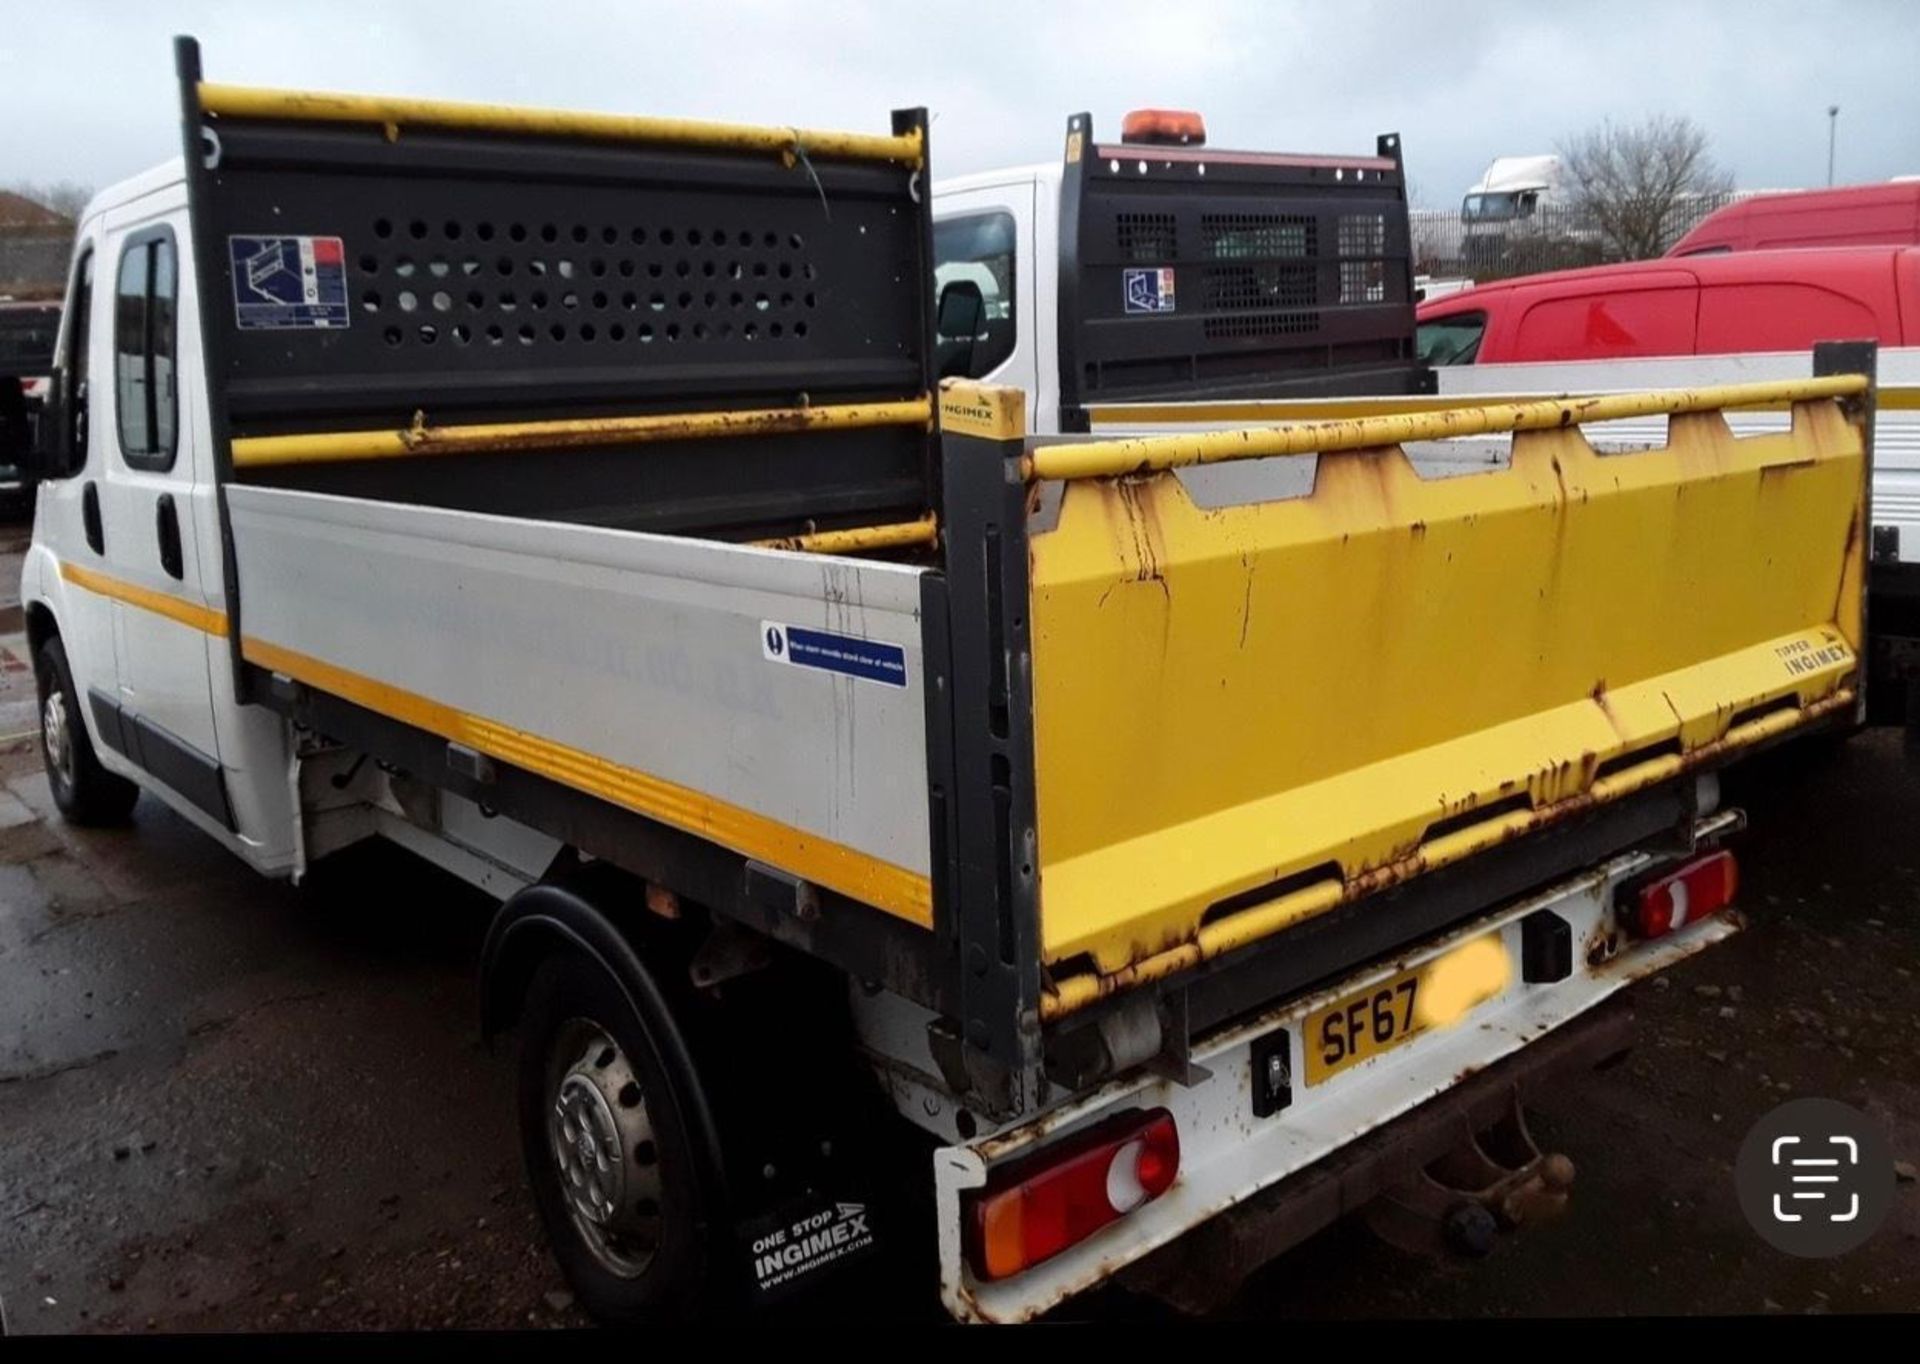 2018 PEUGEOT BOXER DOUBLE CAB TIPPER (SPARES OR REPAIRS) - Image 6 of 7